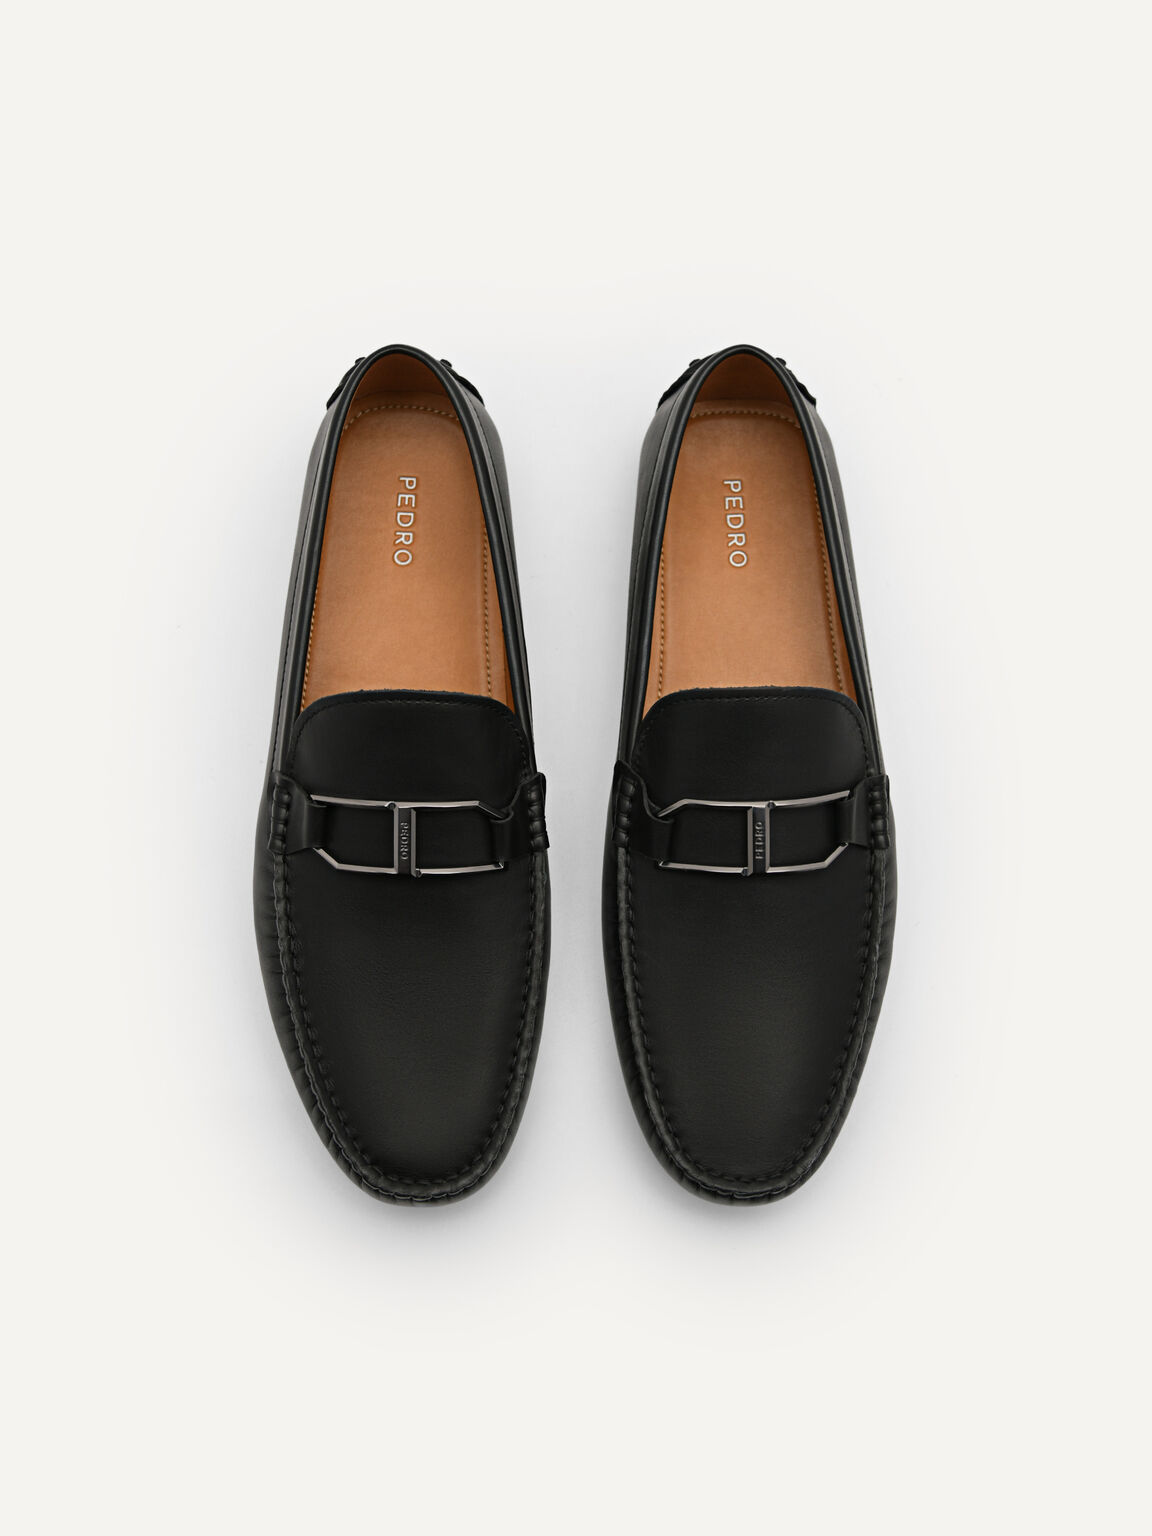 Leather Buckle Moccasins - PEDRO International